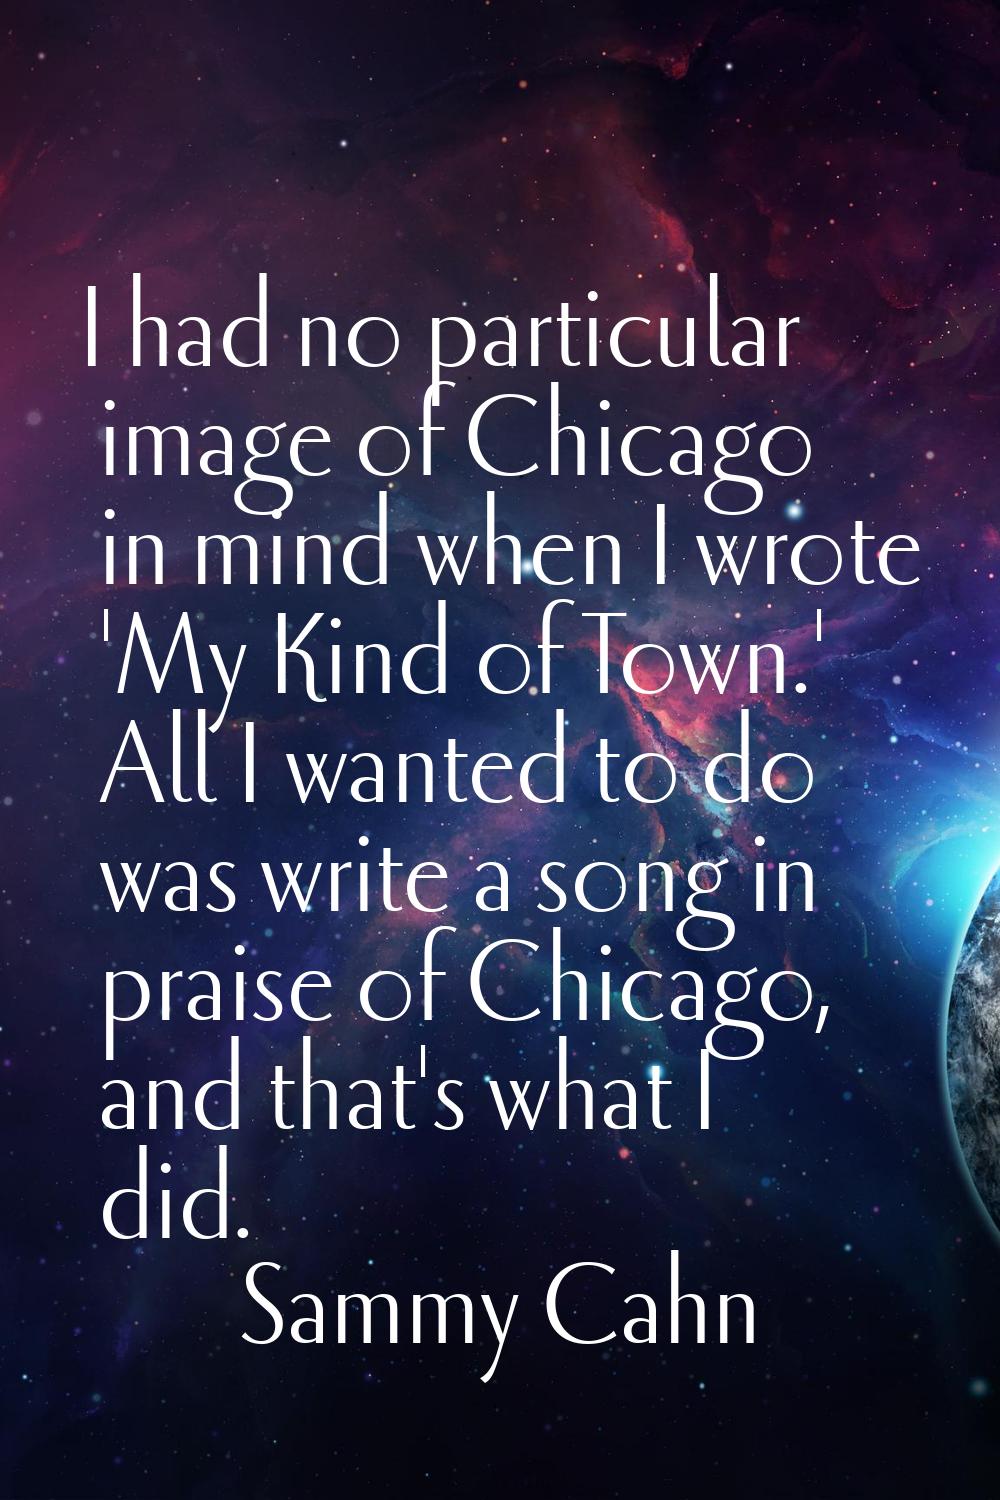 I had no particular image of Chicago in mind when I wrote 'My Kind of Town.' All I wanted to do was